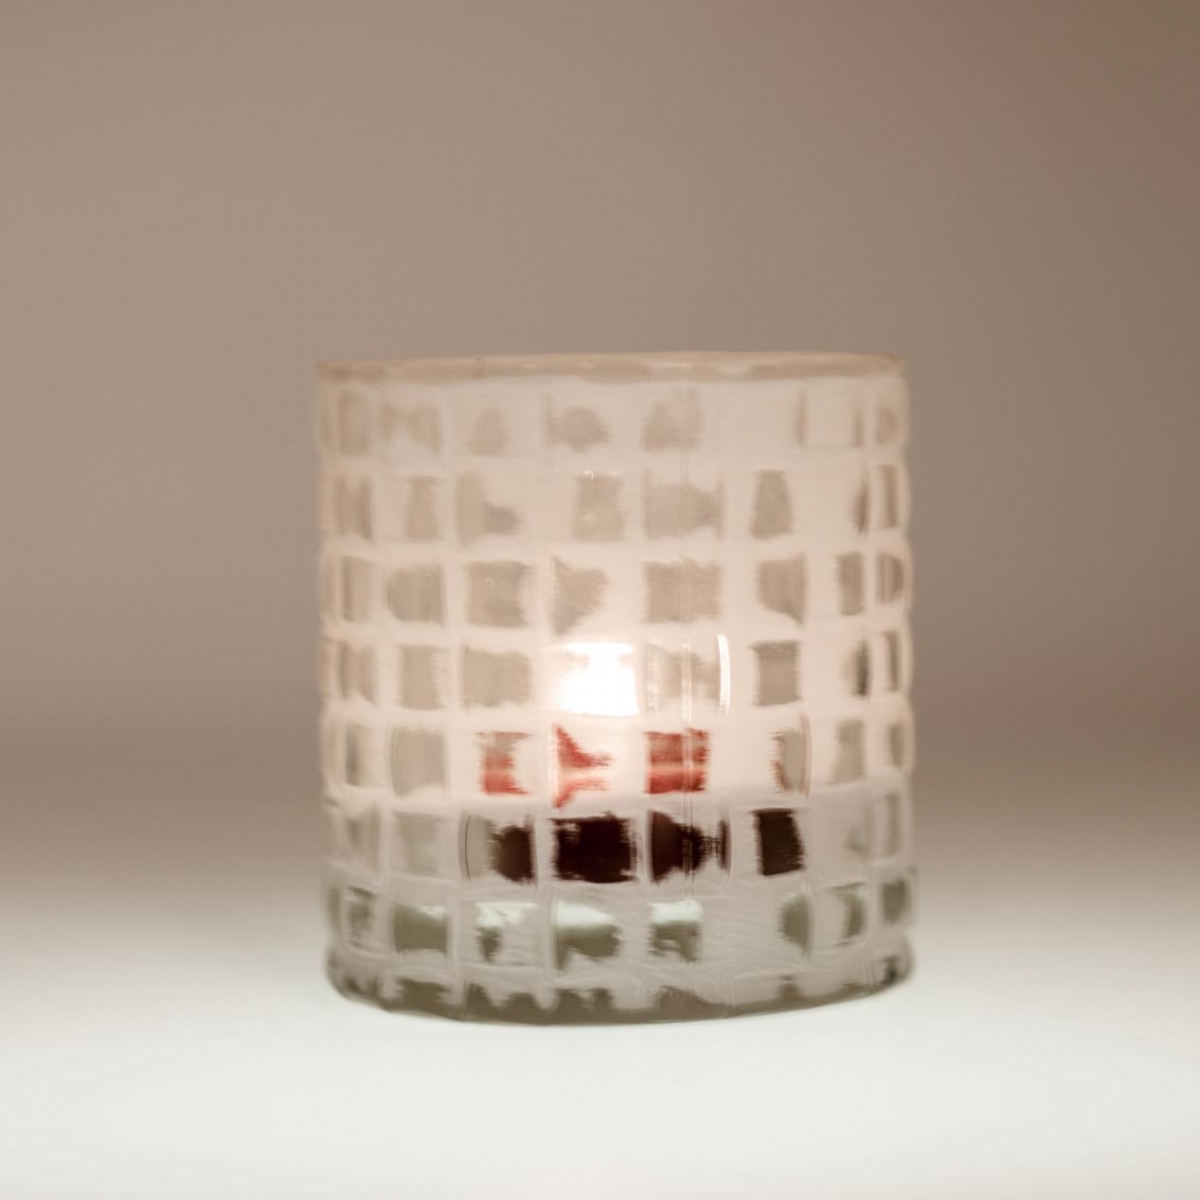 Candle Holder ：Honeycomb Glass Jar , Polished Color ,Ceramic White , Home Sweet Home , China Factory Price-HOWCANDLE-Candles,Scented Candles,Aromatherapy Candles,Soy Candles,Vegan Candles,Jar Candles,Pillar Candles,Candle Gift Sets,Essential Oils,Reed Diffuser,Candle Holder,